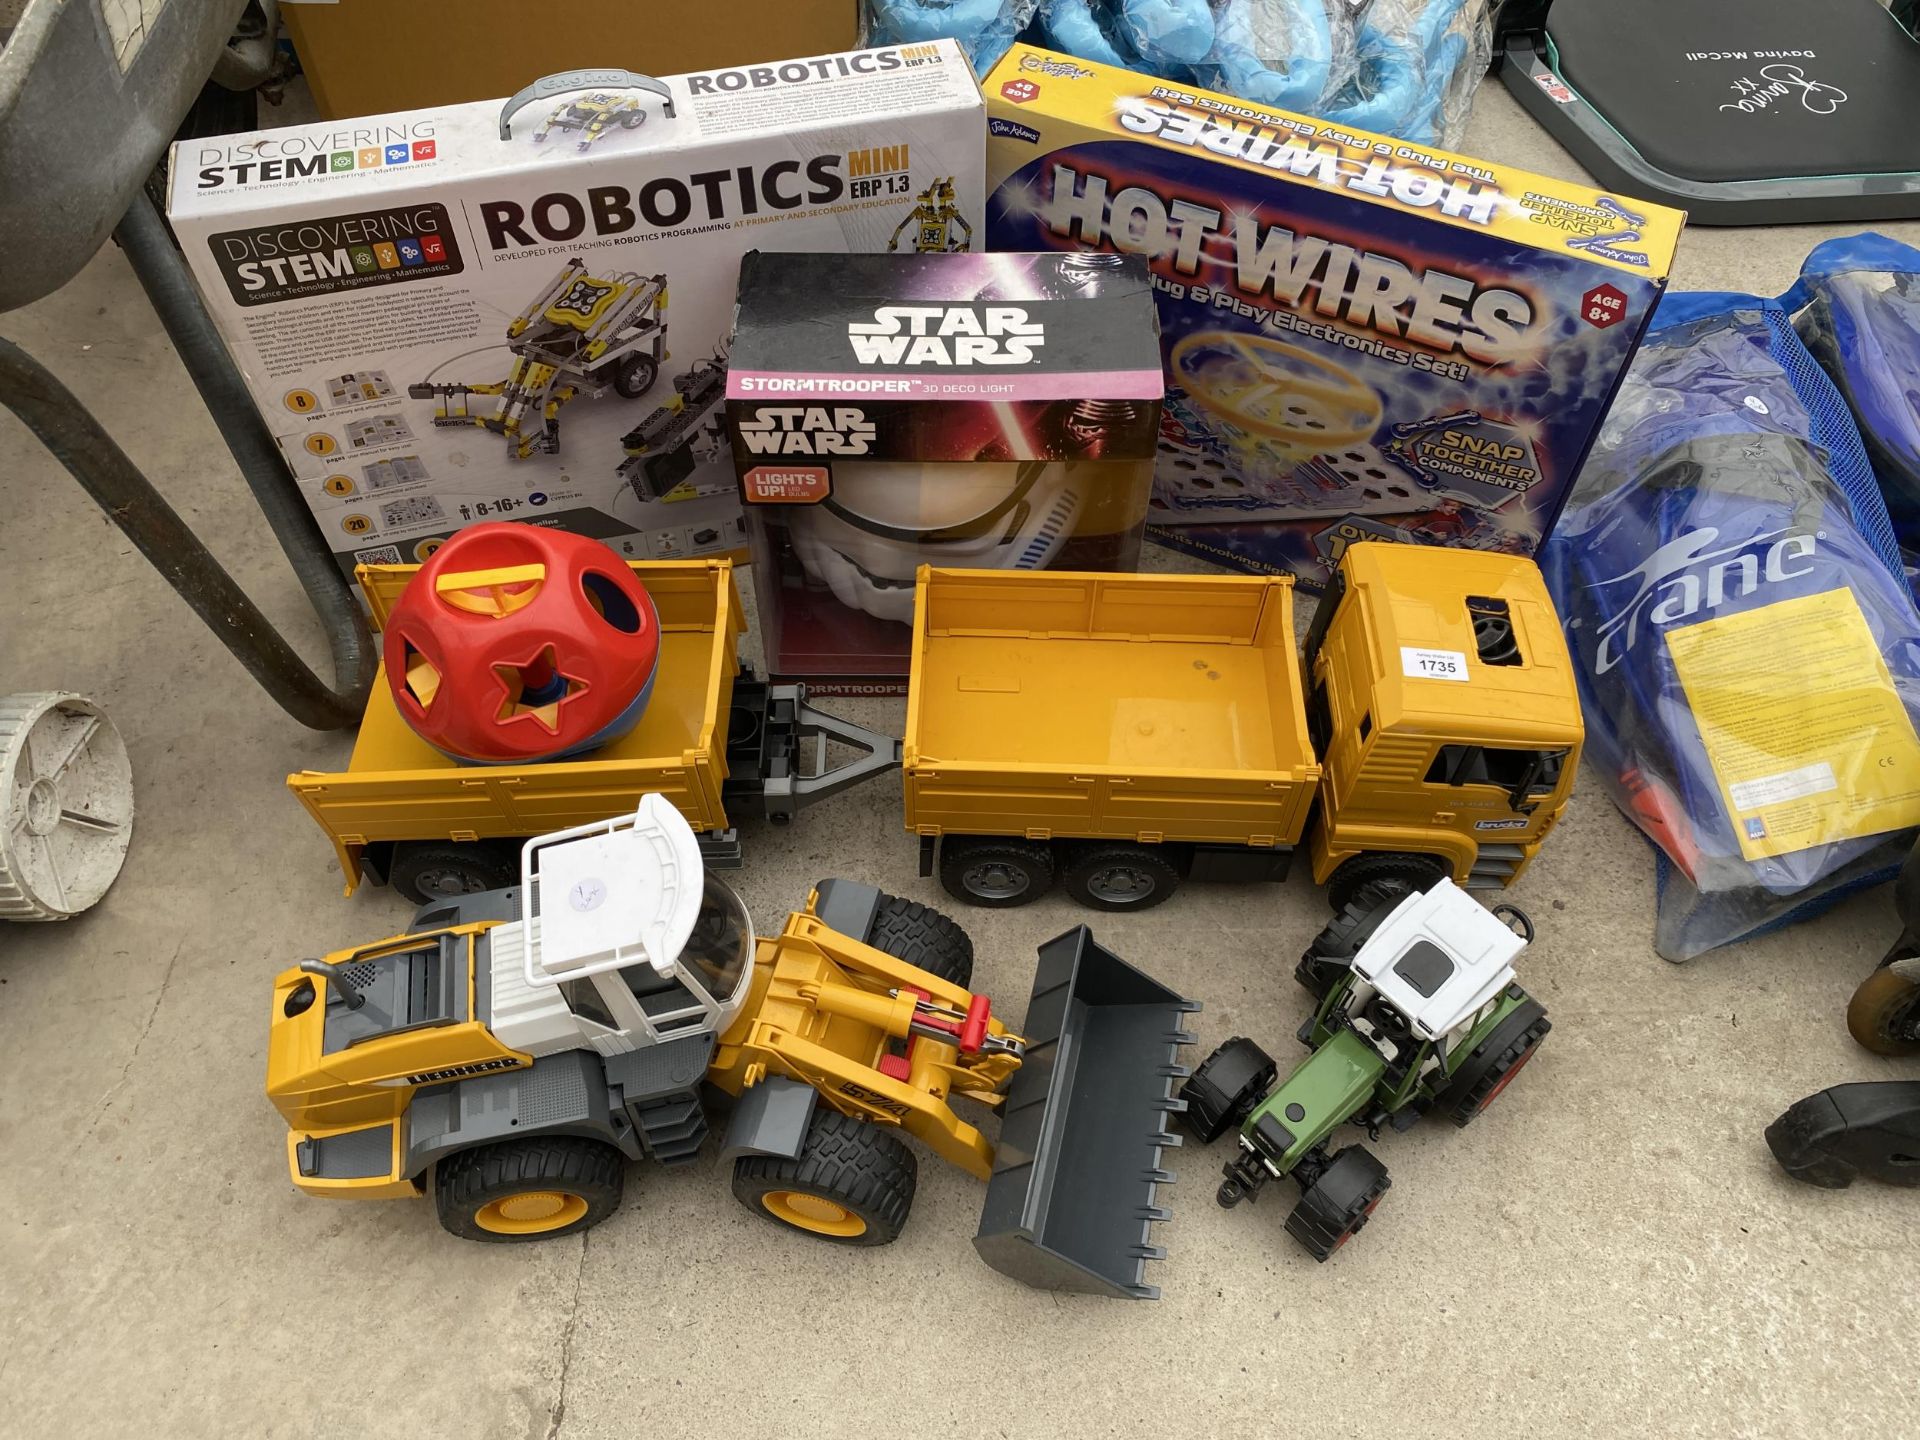 AN ASSORTMENT OF CHILDRENS TOYS TO INCLUDE AGRUICULTURAL VEHICLES, A BOARD GAME AND A ROBOTICS